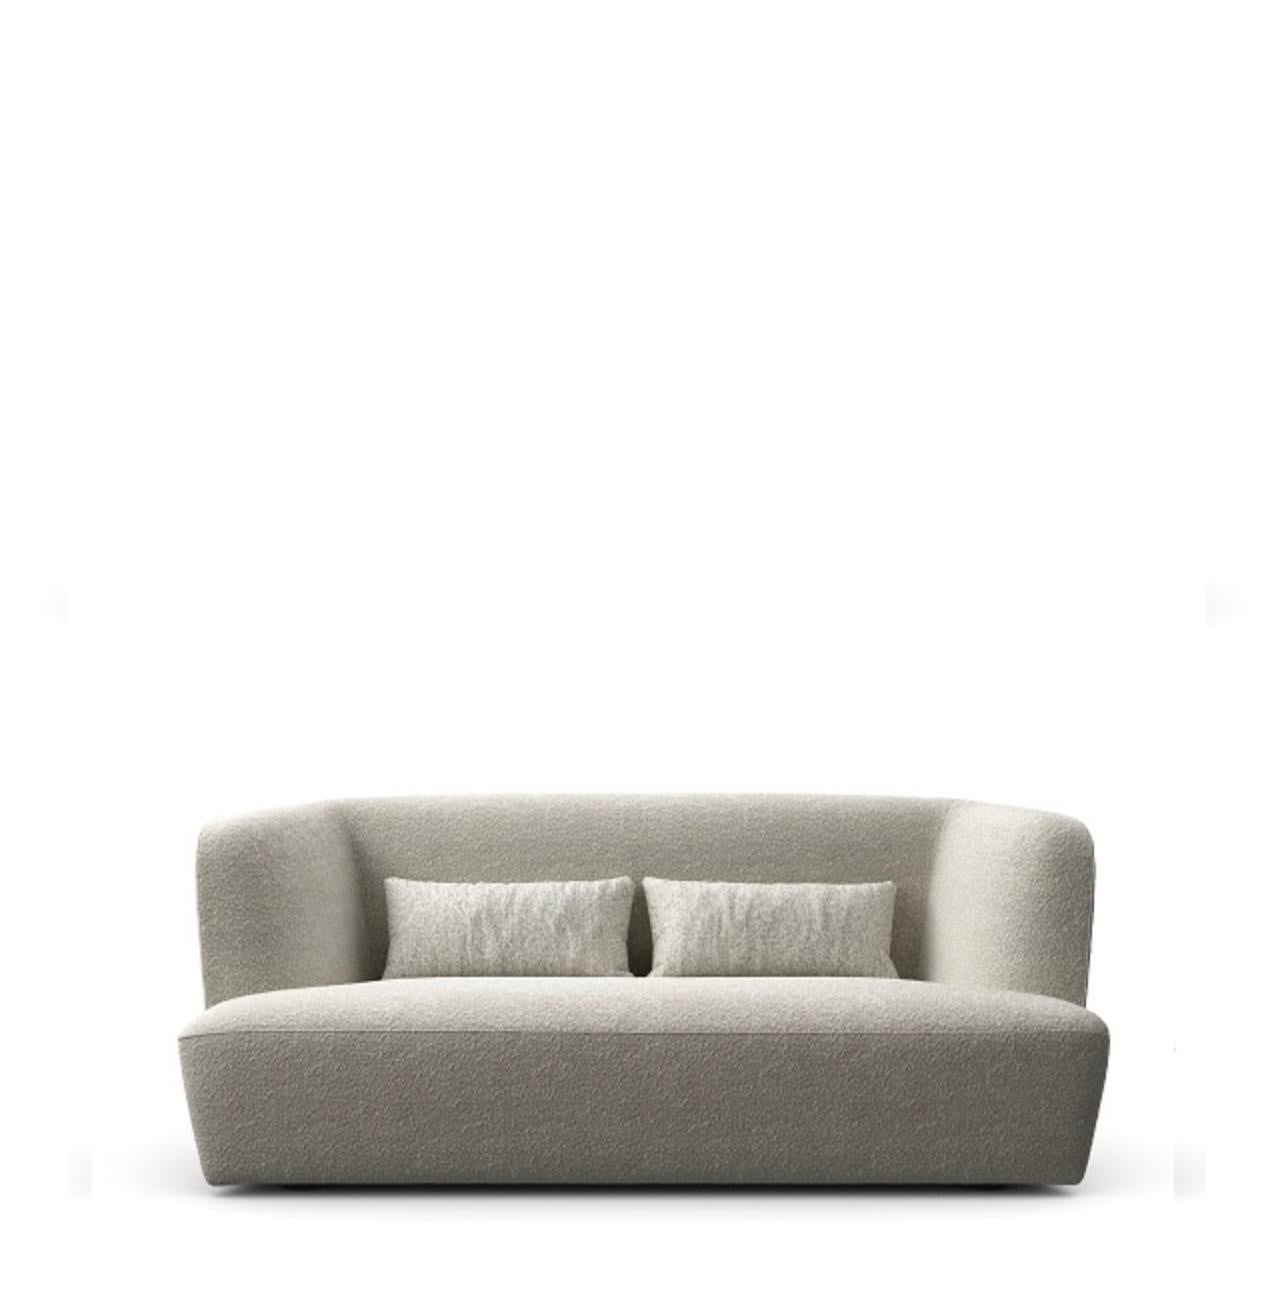 Lievore + Altherr Désile Park 'Davos' sofa 205 for Verzelloni, Italy. New, current production.

Davos curved sofa has a rounded line and an elegant and rigorous design, it offers high comfort thanks to the height of its backrest. Davos range